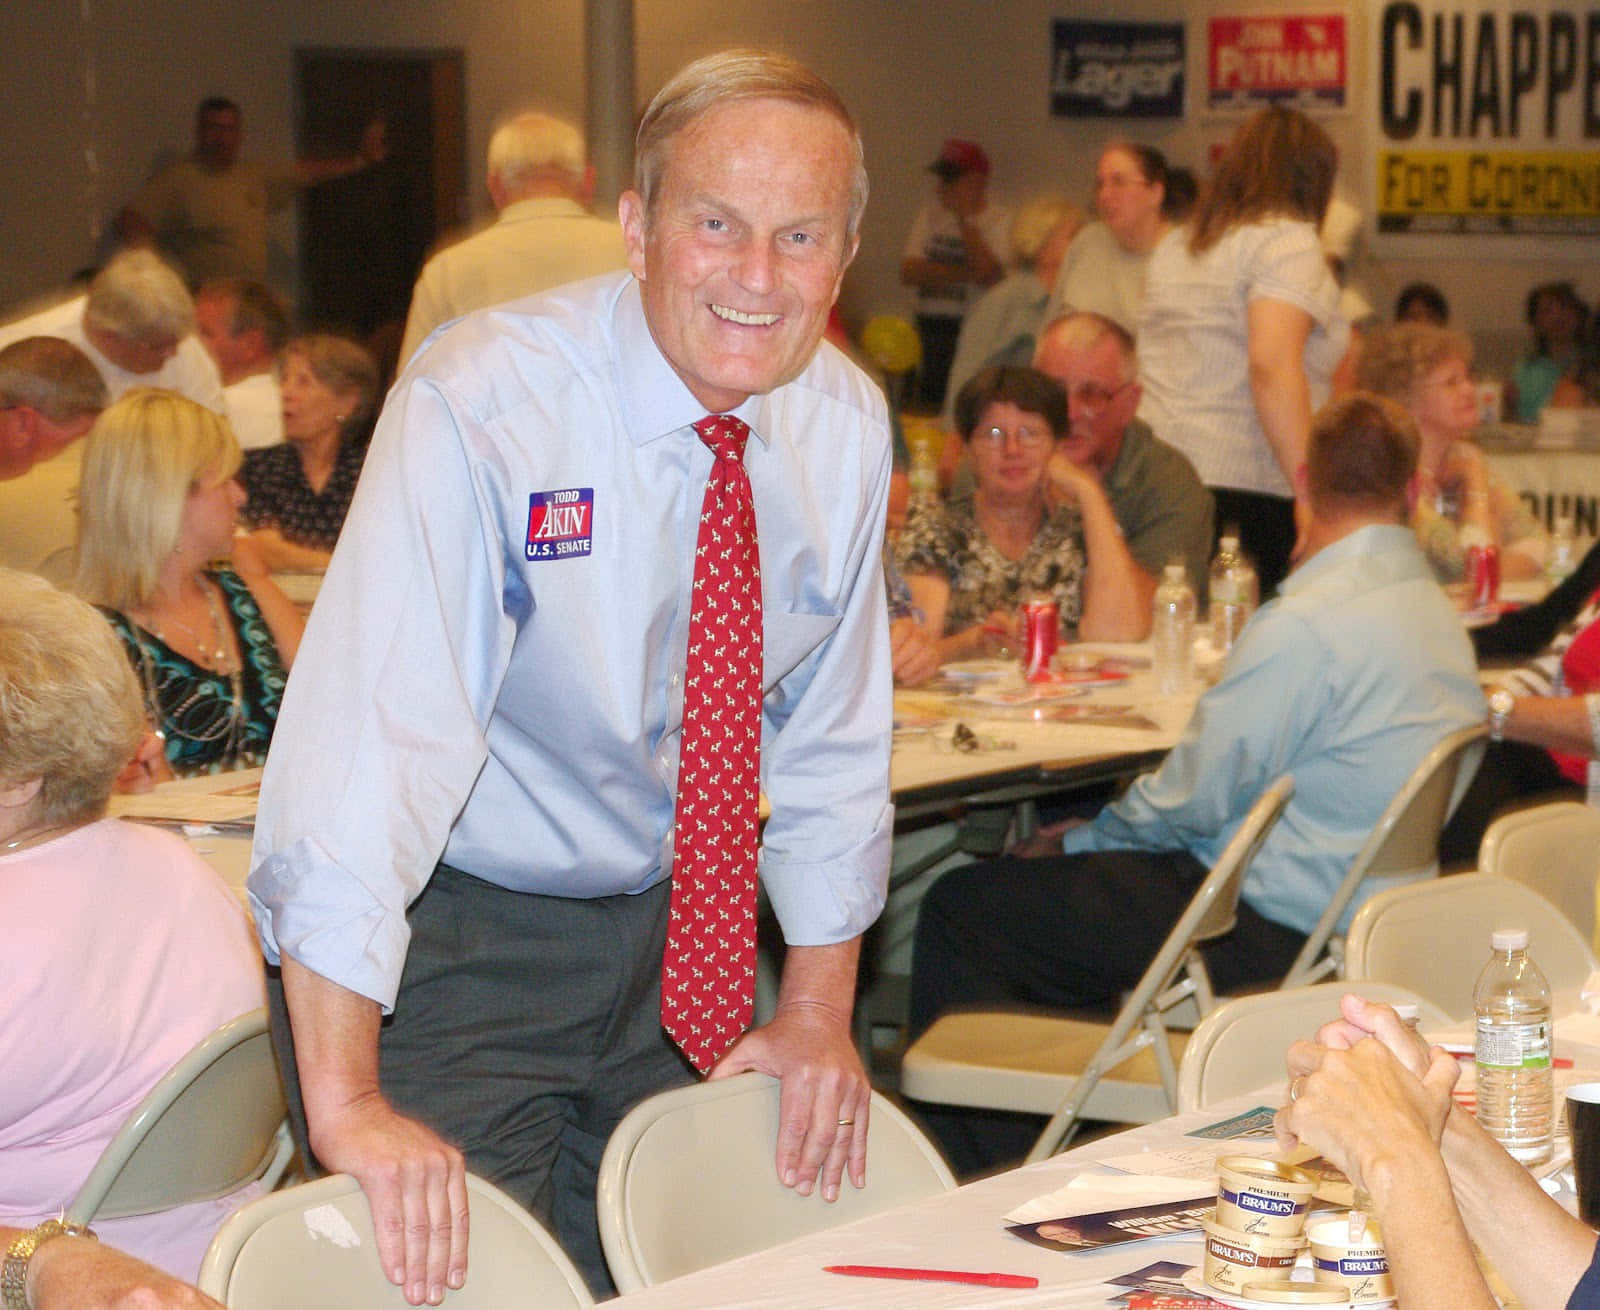 Todd Akin Smiling Campaign Event Background